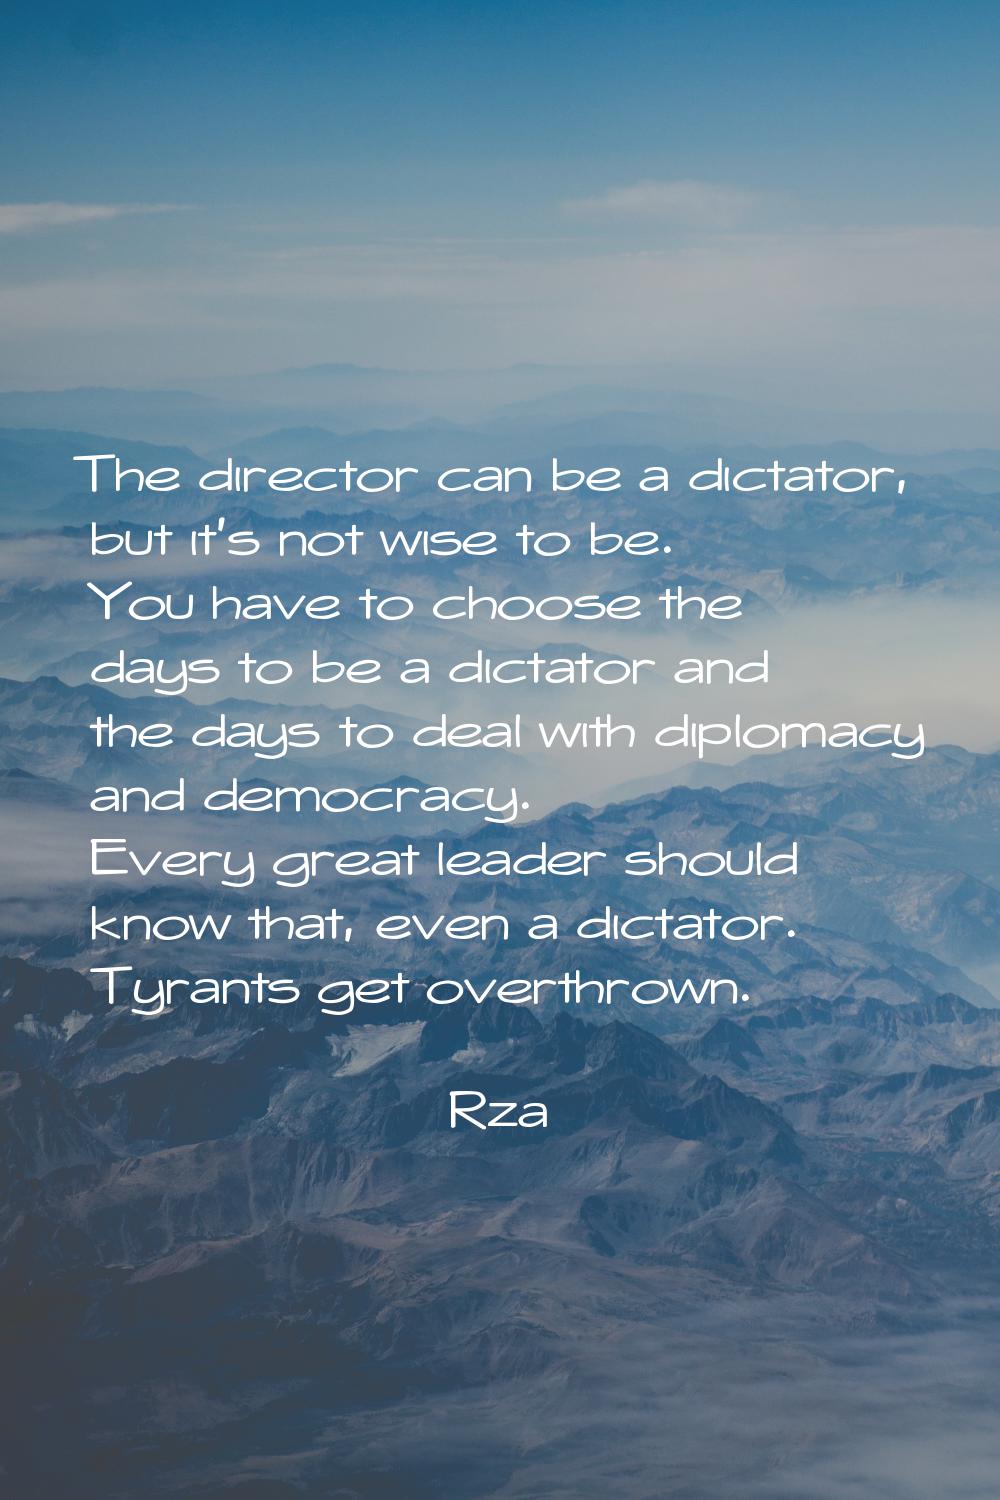 The director can be a dictator, but it's not wise to be. You have to choose the days to be a dictat